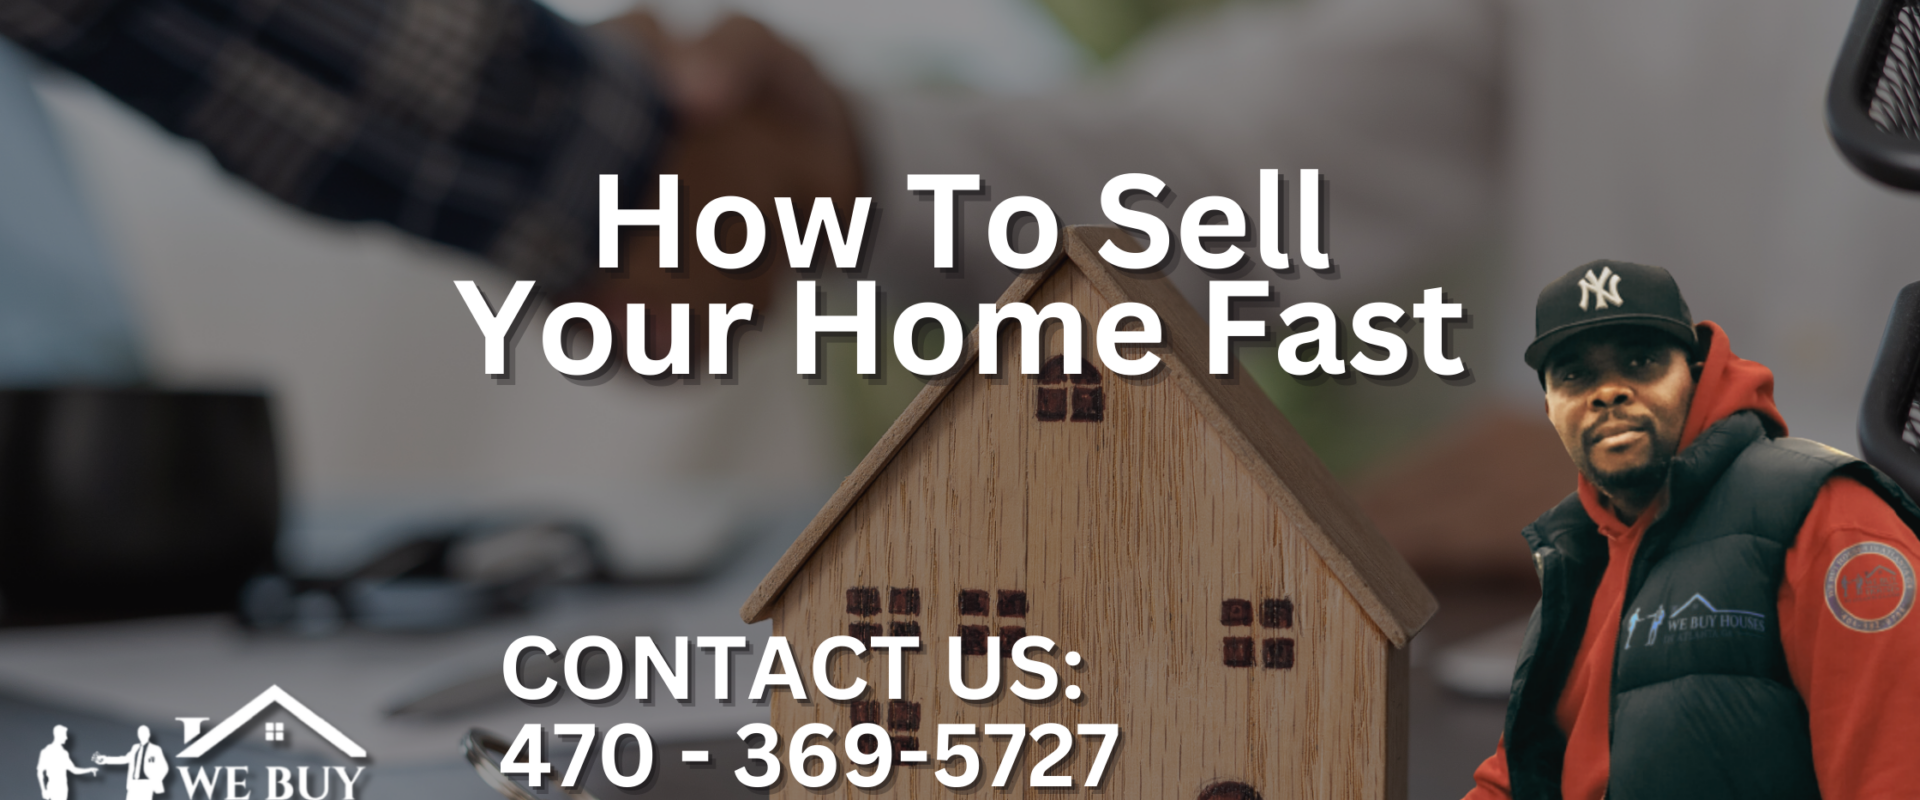 How-To-Sell-Your-Home-Fast